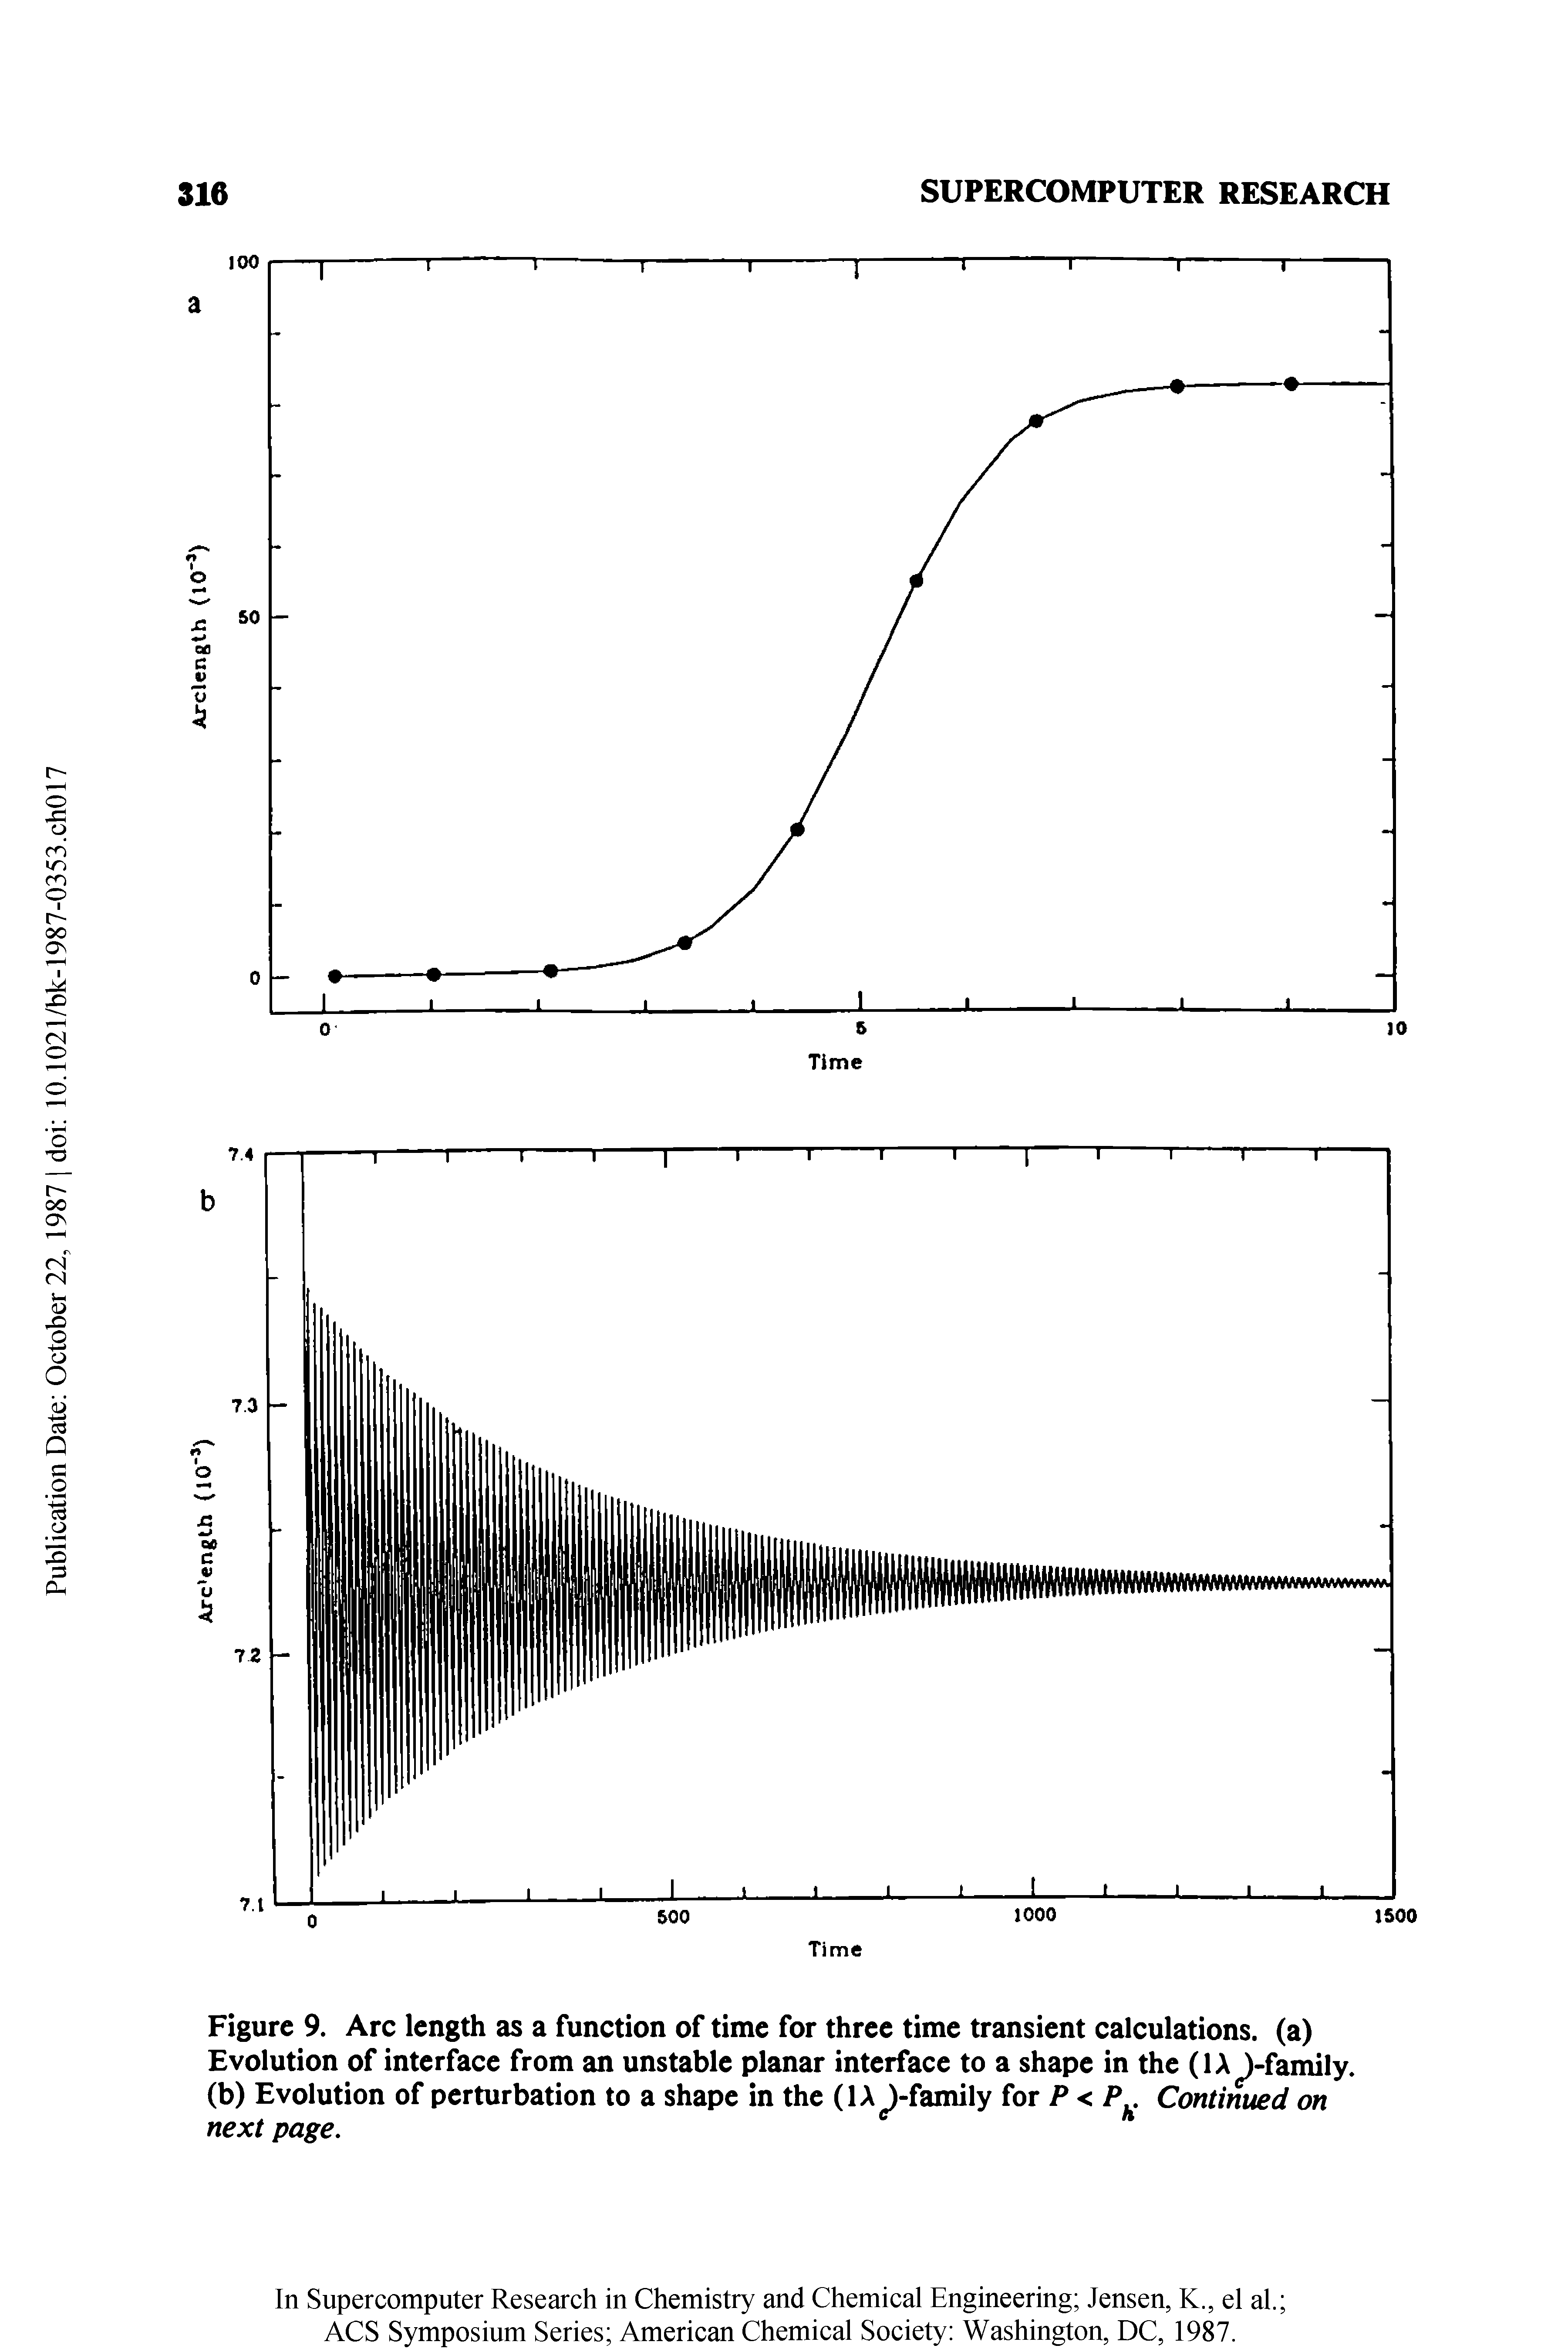 Figure 9. Arc length as a function of time for three time transient calculations, (a) Evolution of interface from an unstable planar interface to a shape in the (lA -family. (b) Evolution of perturbation to a shape in the (up-family for P < Continued on next page.